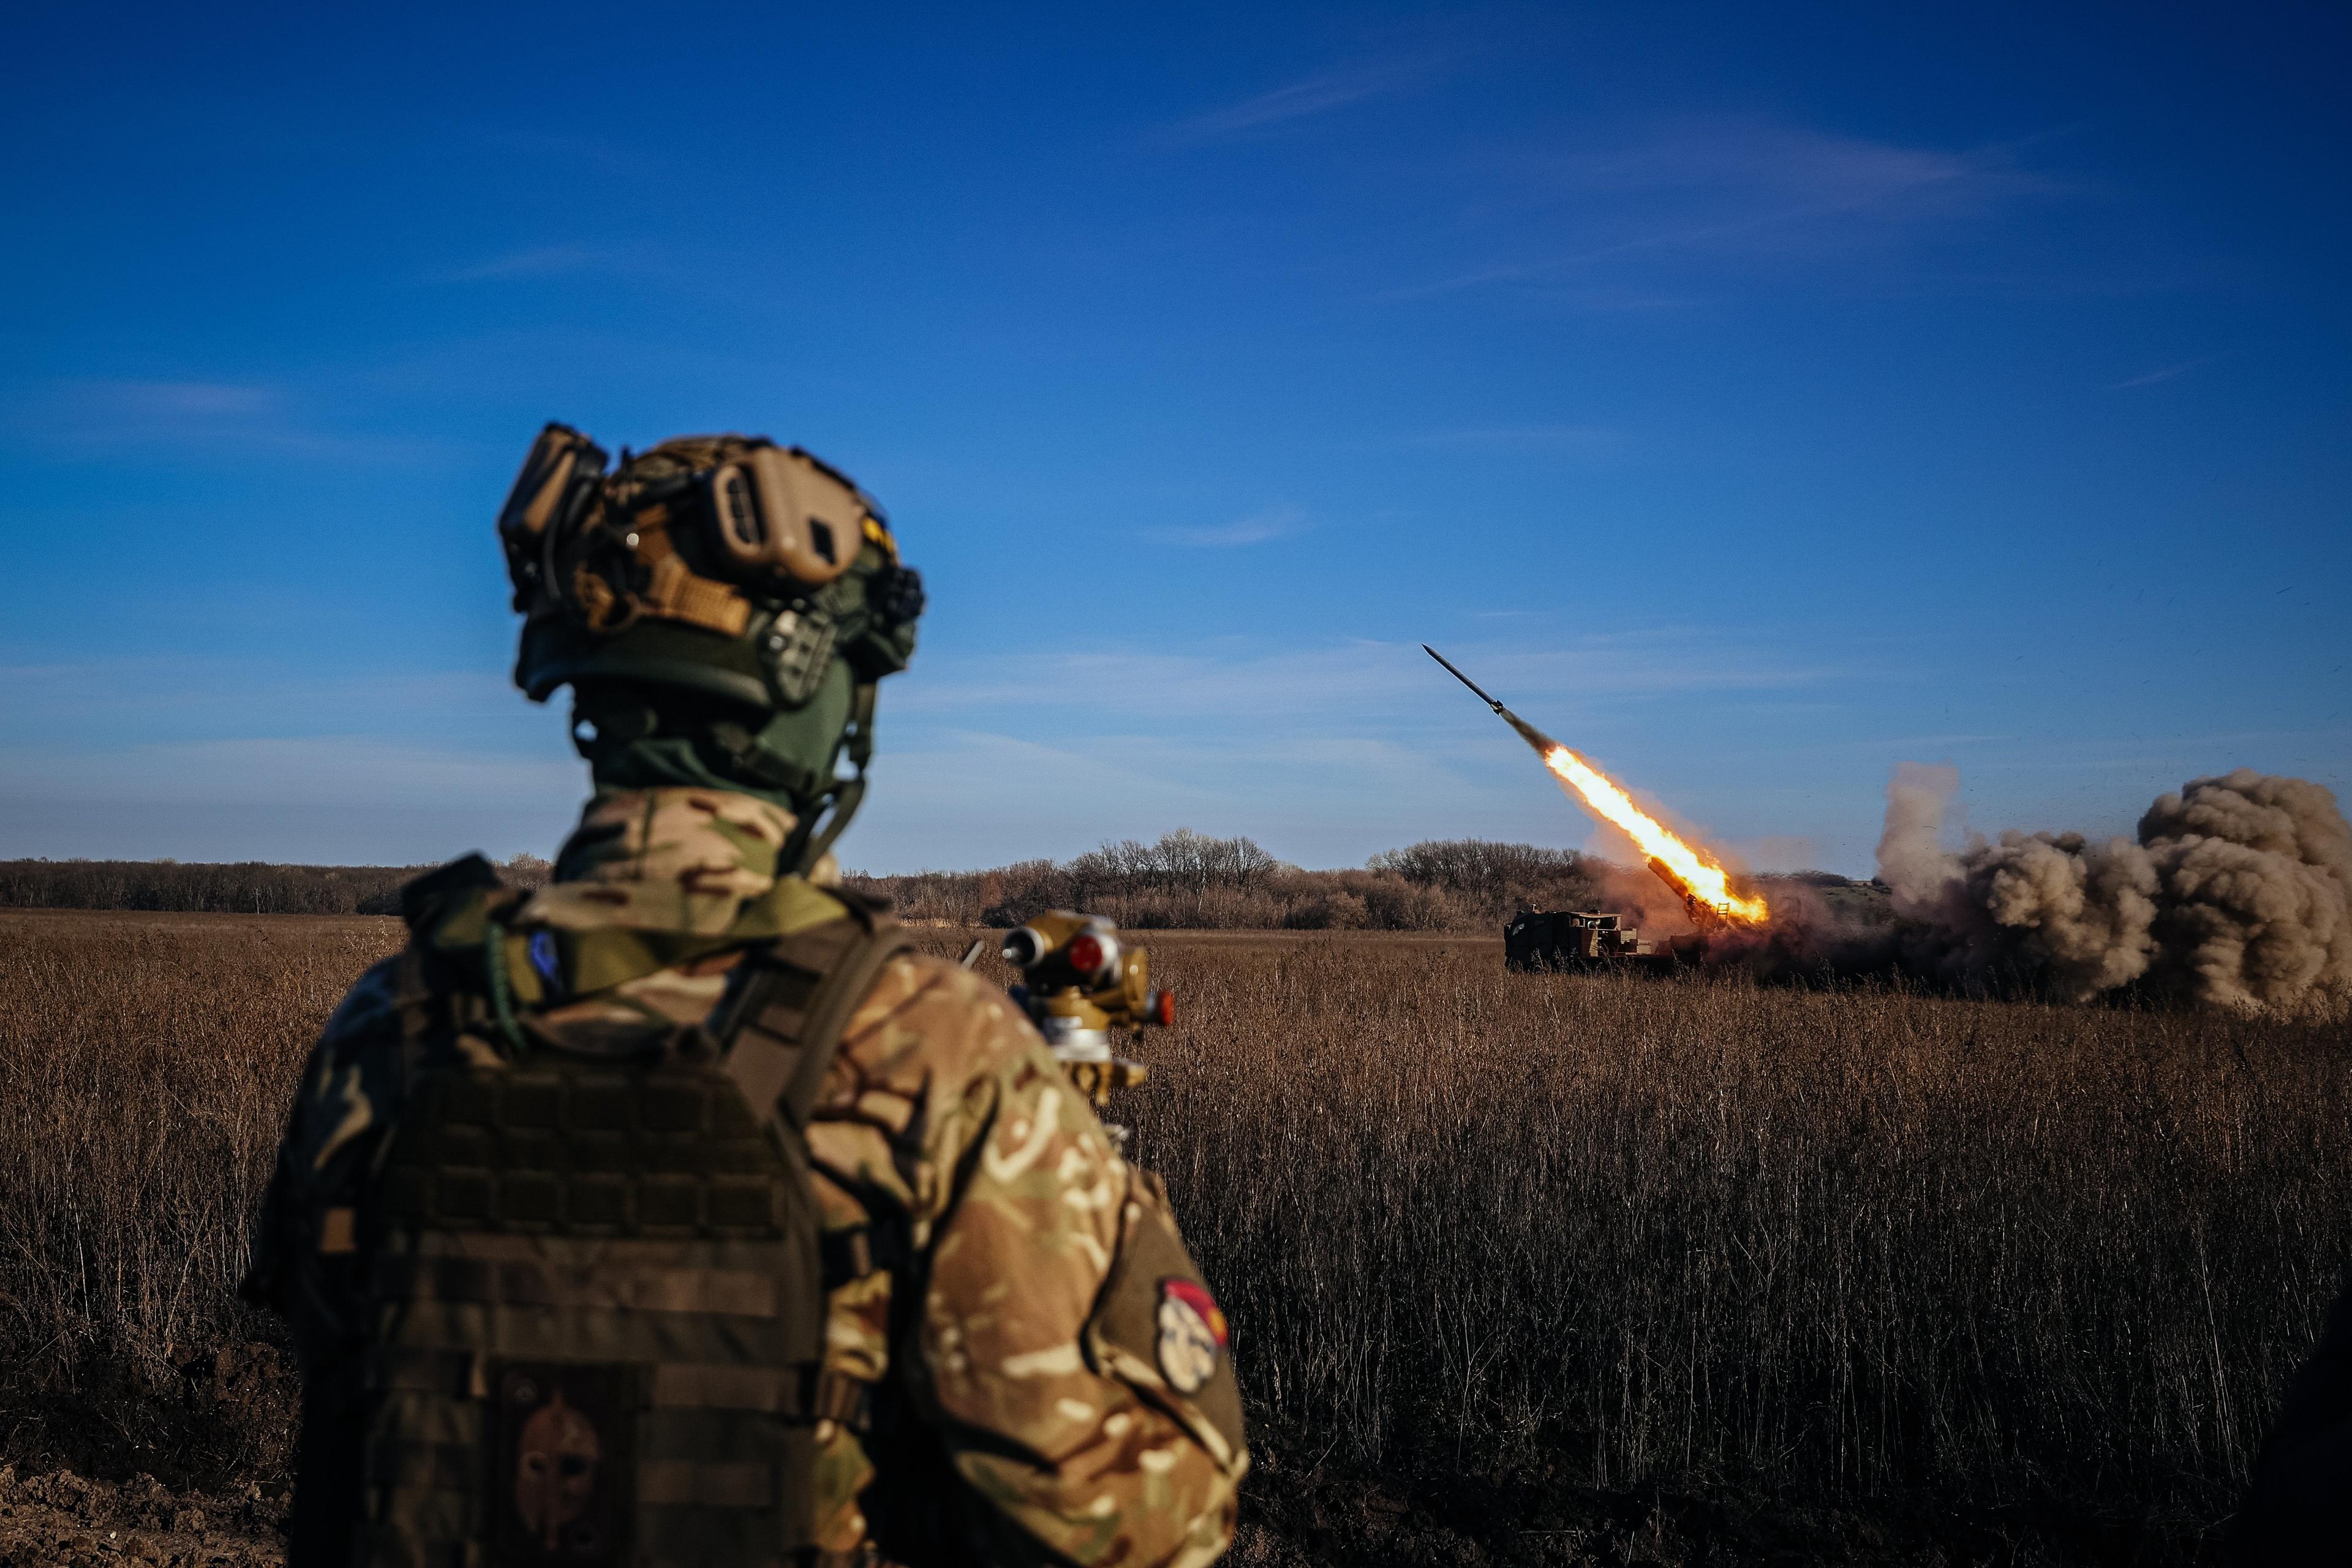 A Ukrainian soldier watches a self-propelled 220 mm multiple rocket launcher "Bureviy" firing towards Russian positions on the front line, eastern Ukraine on November 29, 2022, amid the Russian invasion of Ukraine. (Photo by ANATOLII STEPANOV / AFP)